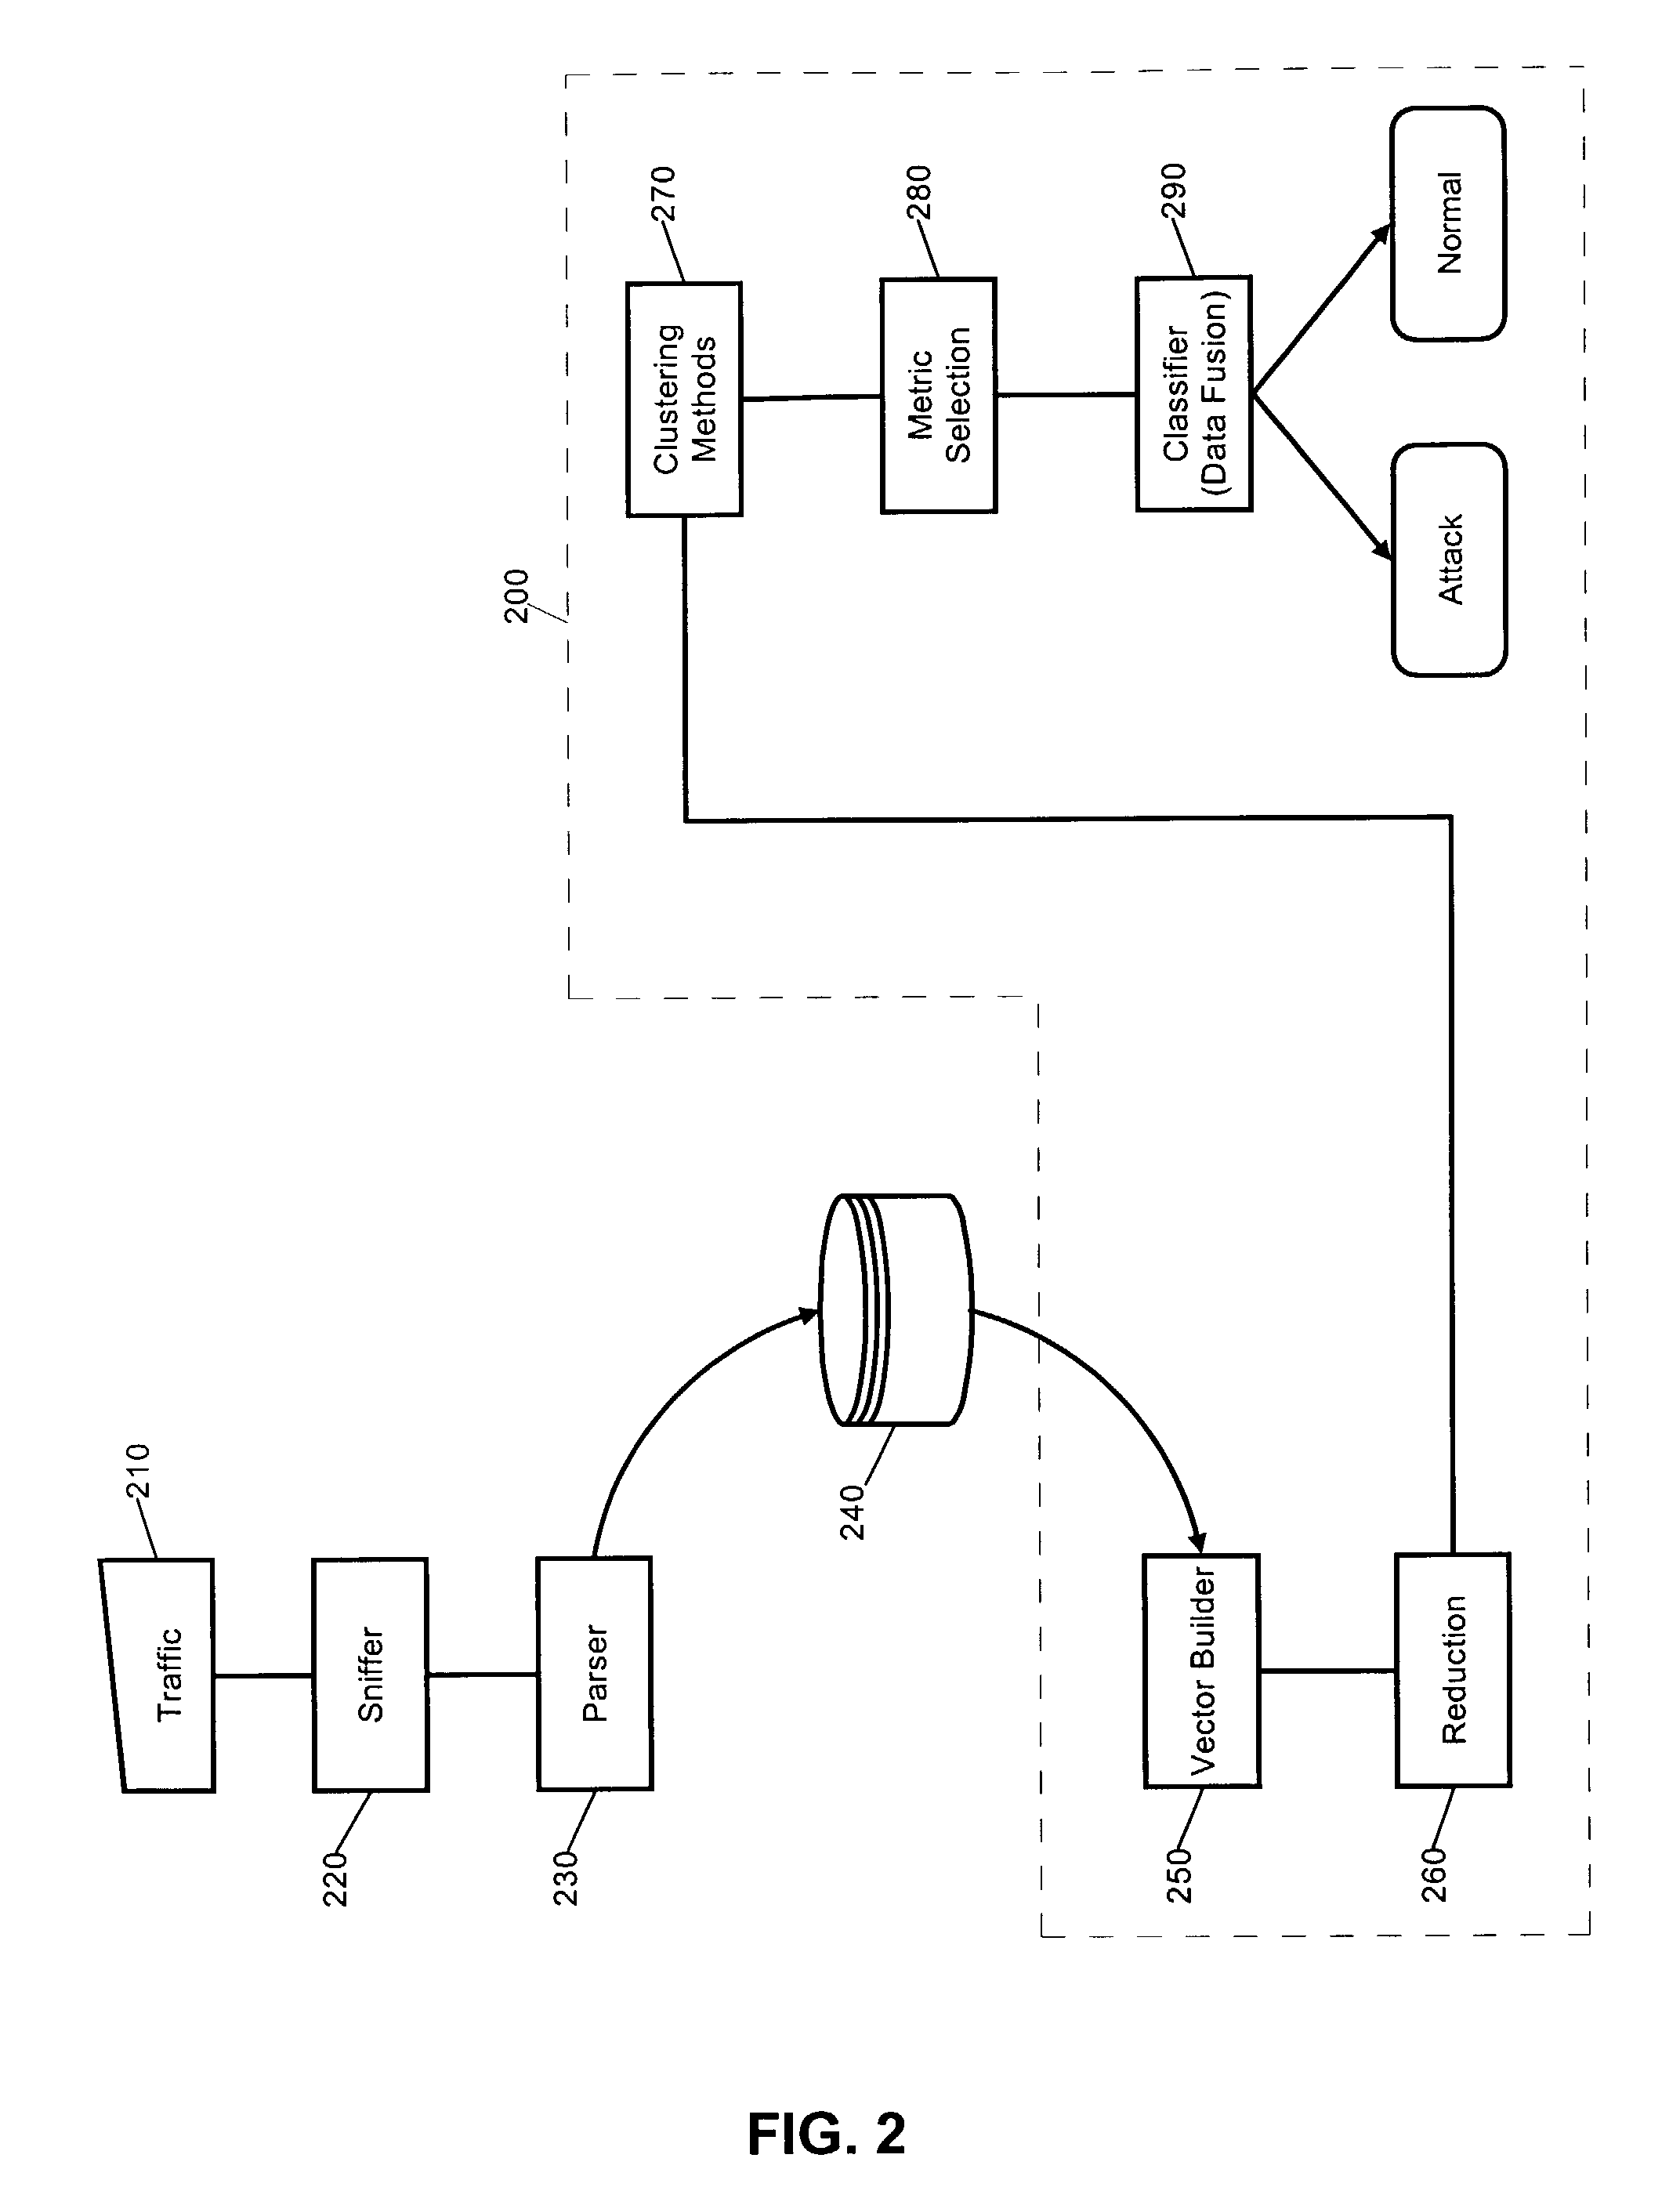 Intrusion detection system using self-organizing clusters